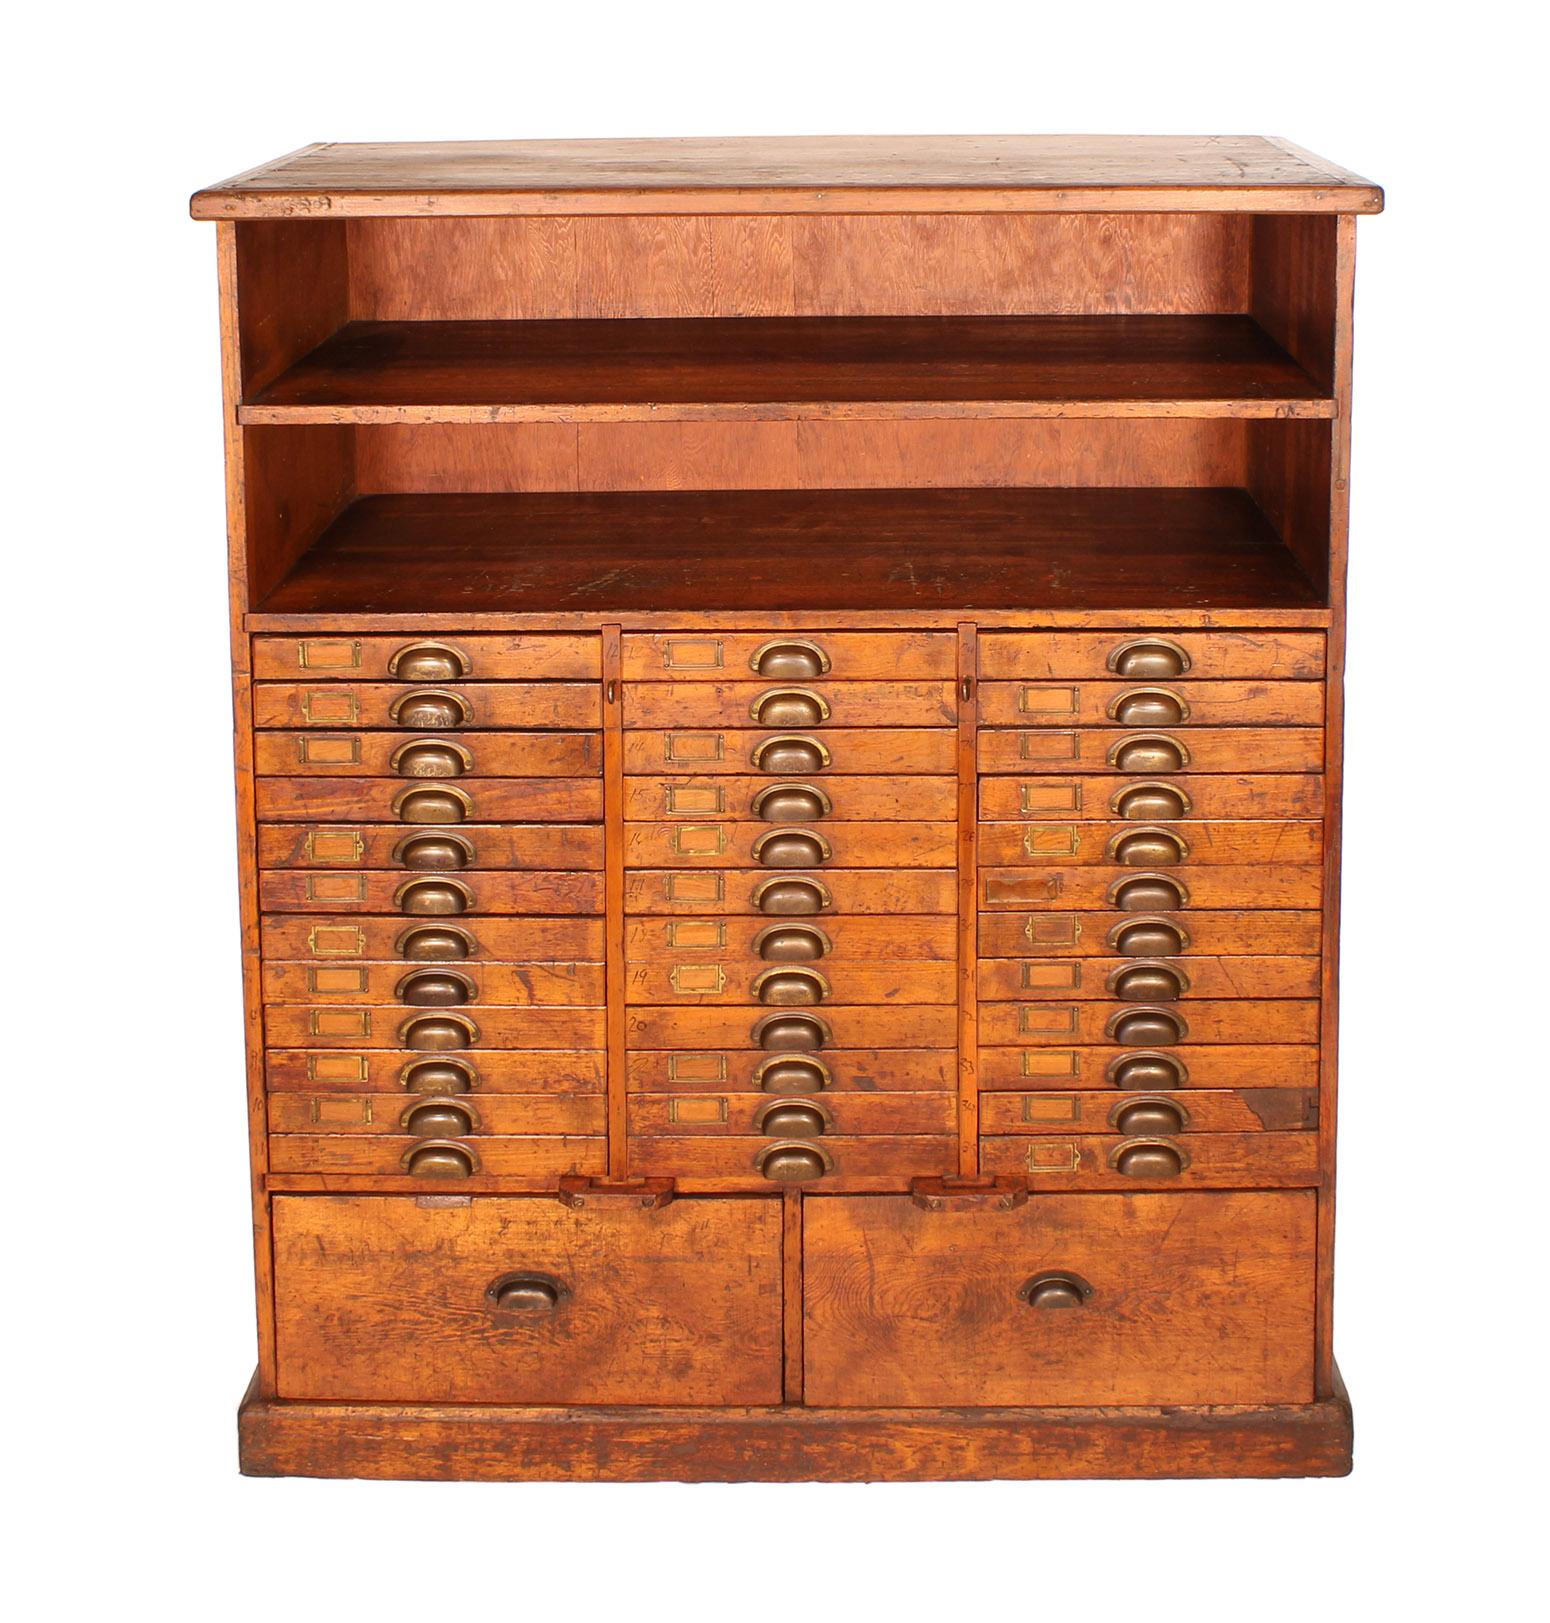 Vintage industrial authentic 1920s machinists tools and parts storage cabinet. Features thirty six smaller drawers, two larger drawers and two cubby compartments. Brass hardware, handles and name plates are used throughout, with some of the drawers